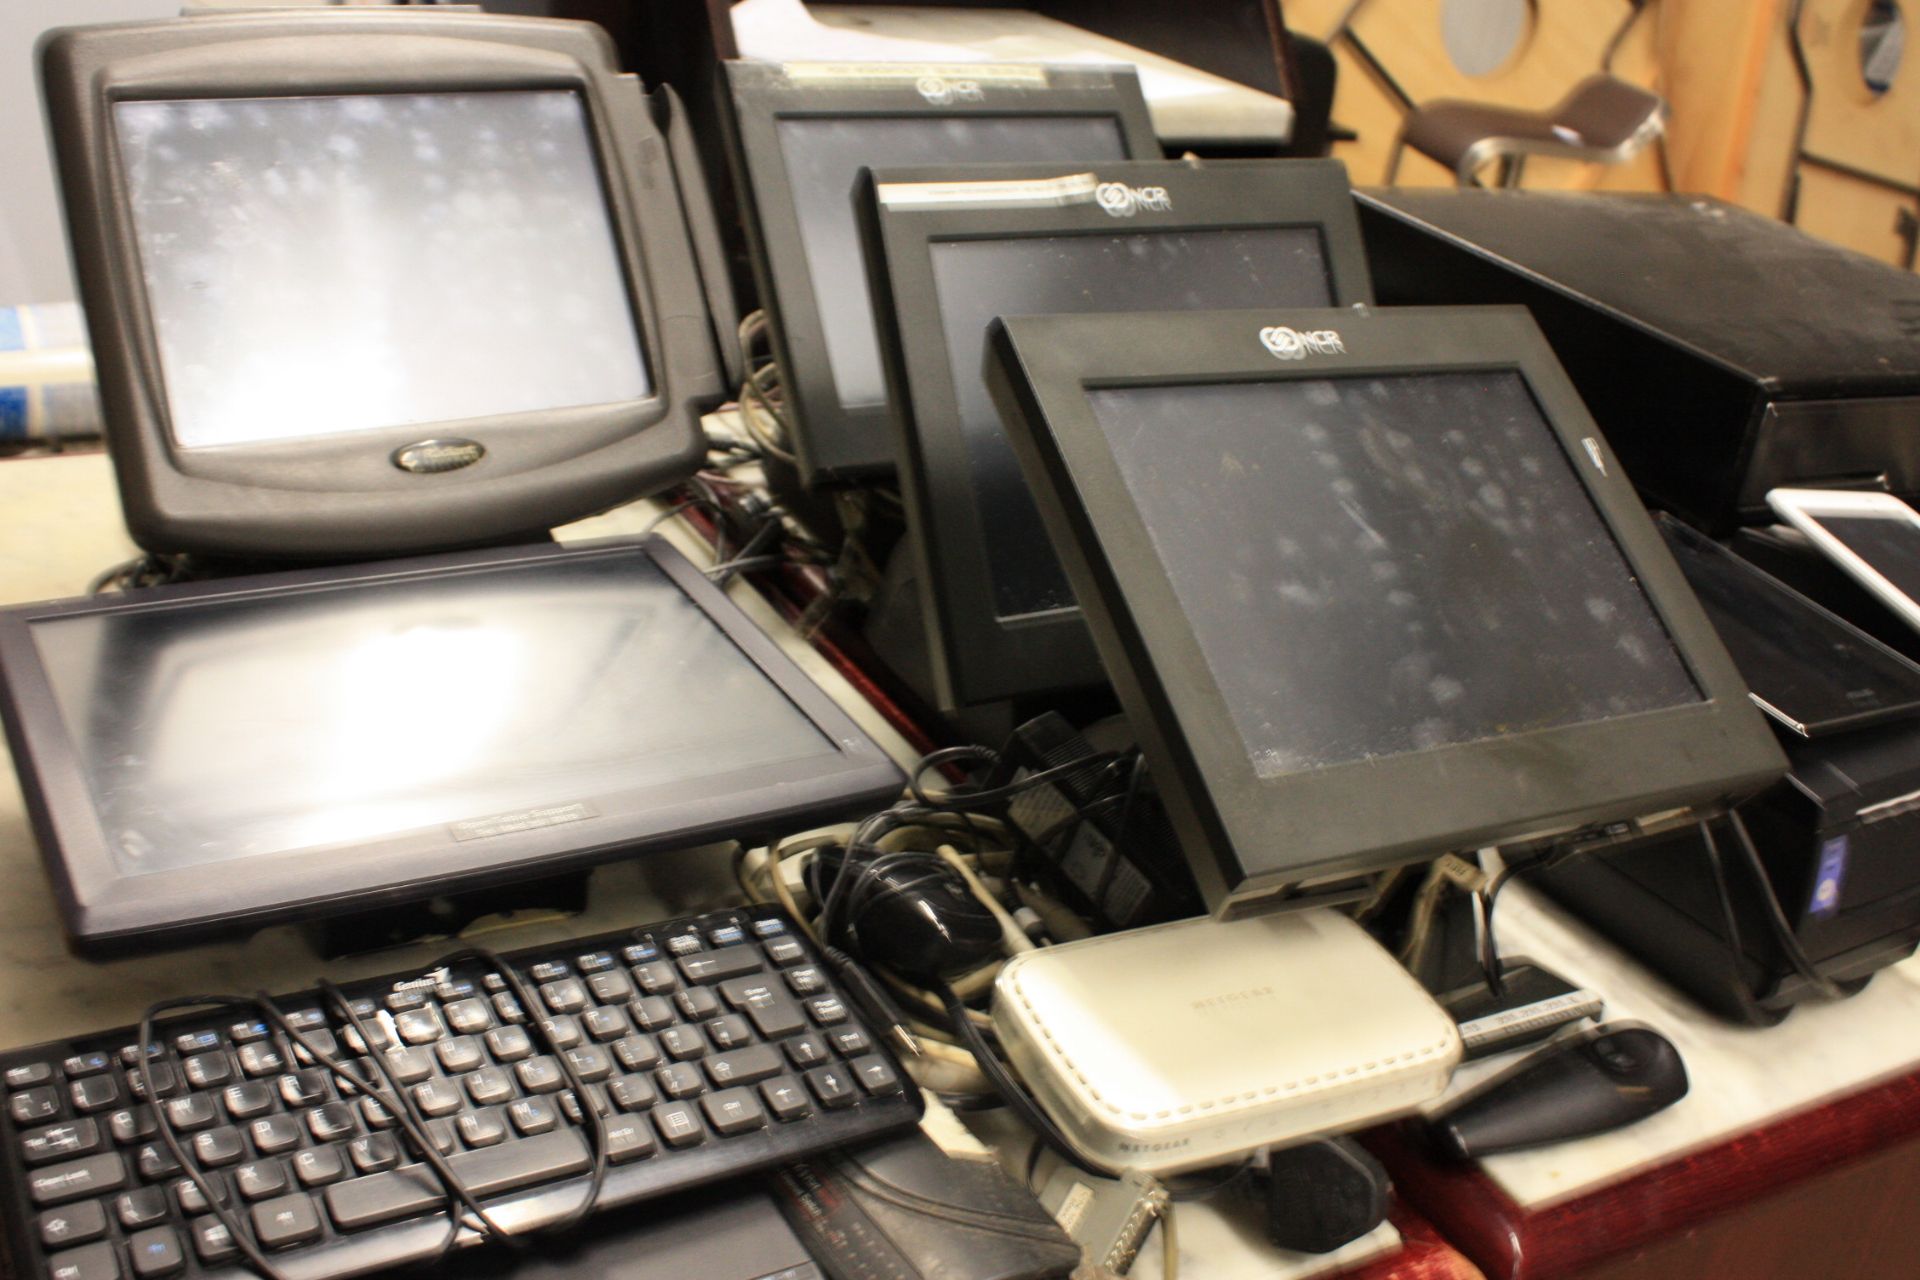 5 Screen POS/ Epos System with 2 x Asus Ordering Tablets - Image 4 of 4